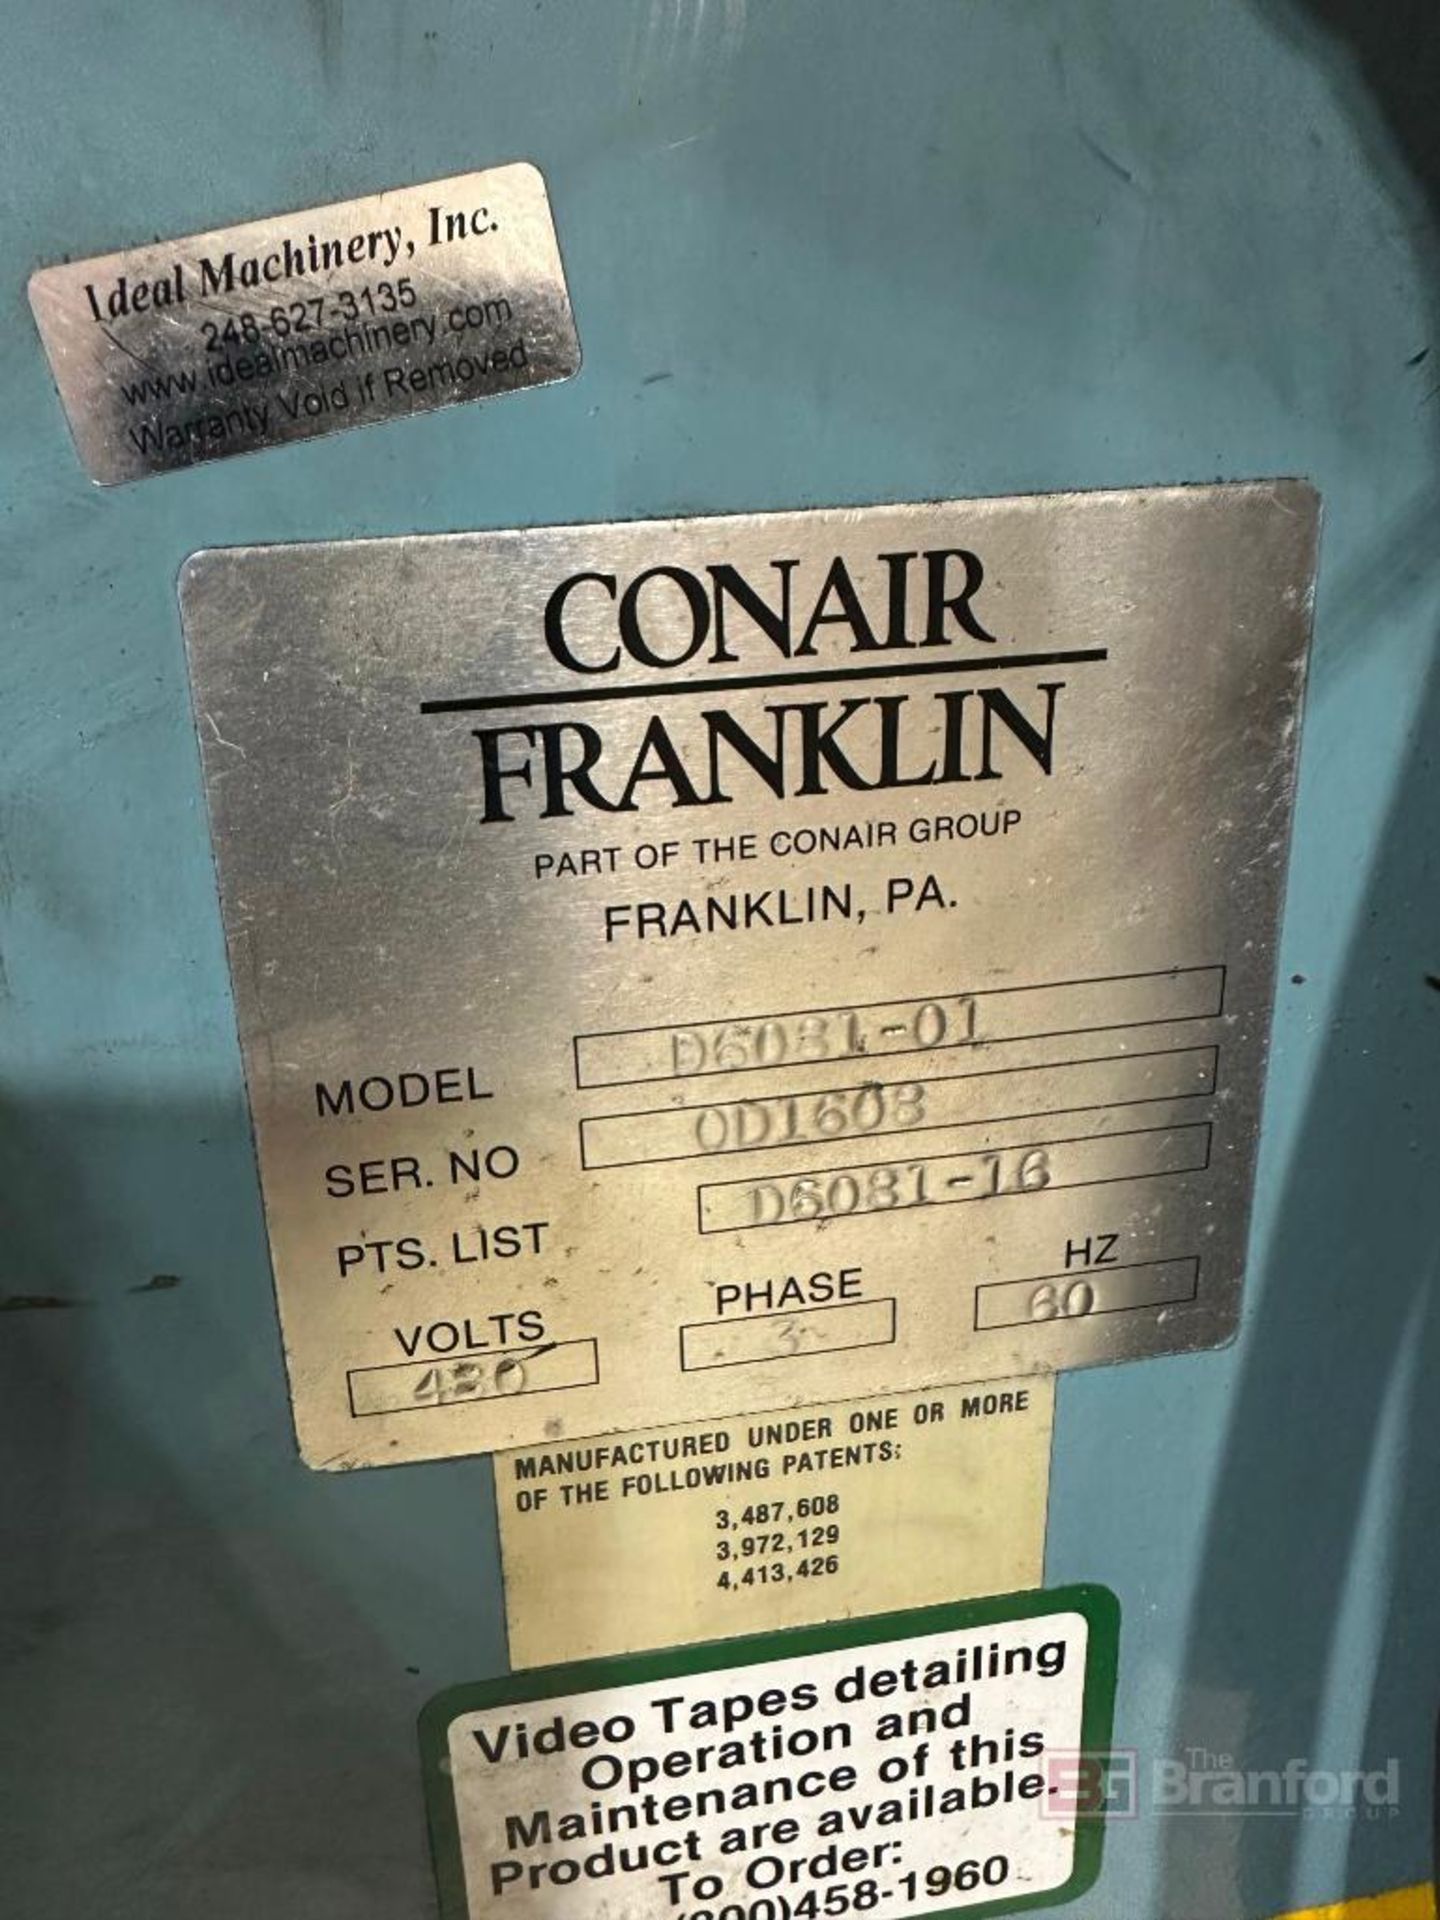 Conair/Franklin Model D6081-01 Compu-Dry Predrying System - Image 5 of 5